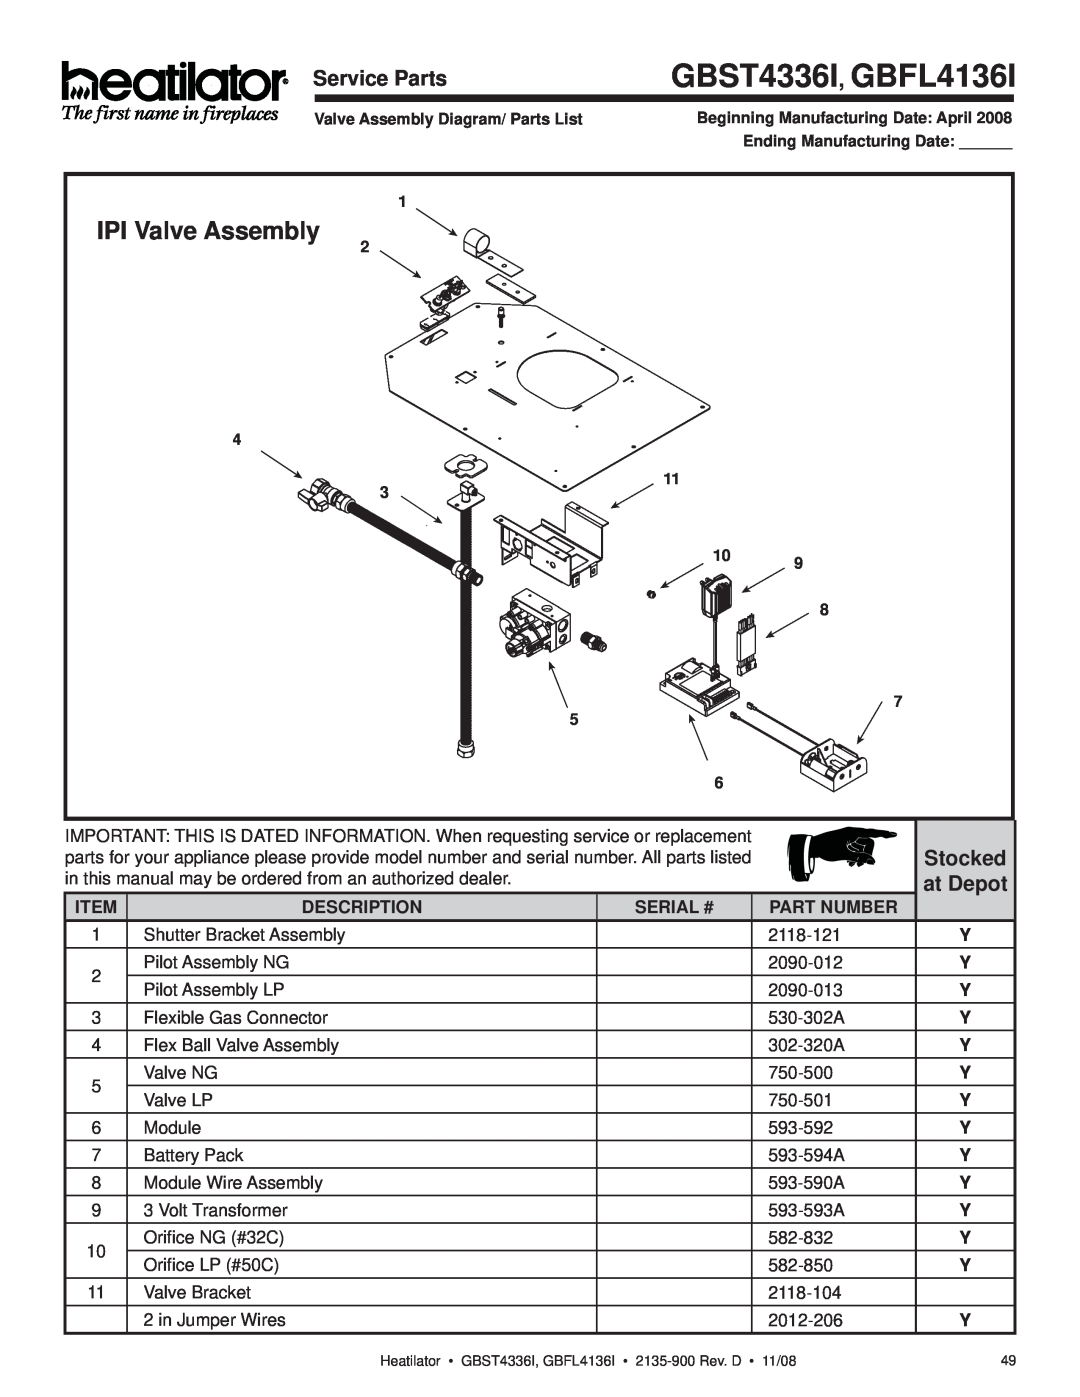 Hearth and Home Technologies owner manual GBST4336I, GBFL4136I, IPI Valve Assembly, Service Parts, Stocked, at Depot 